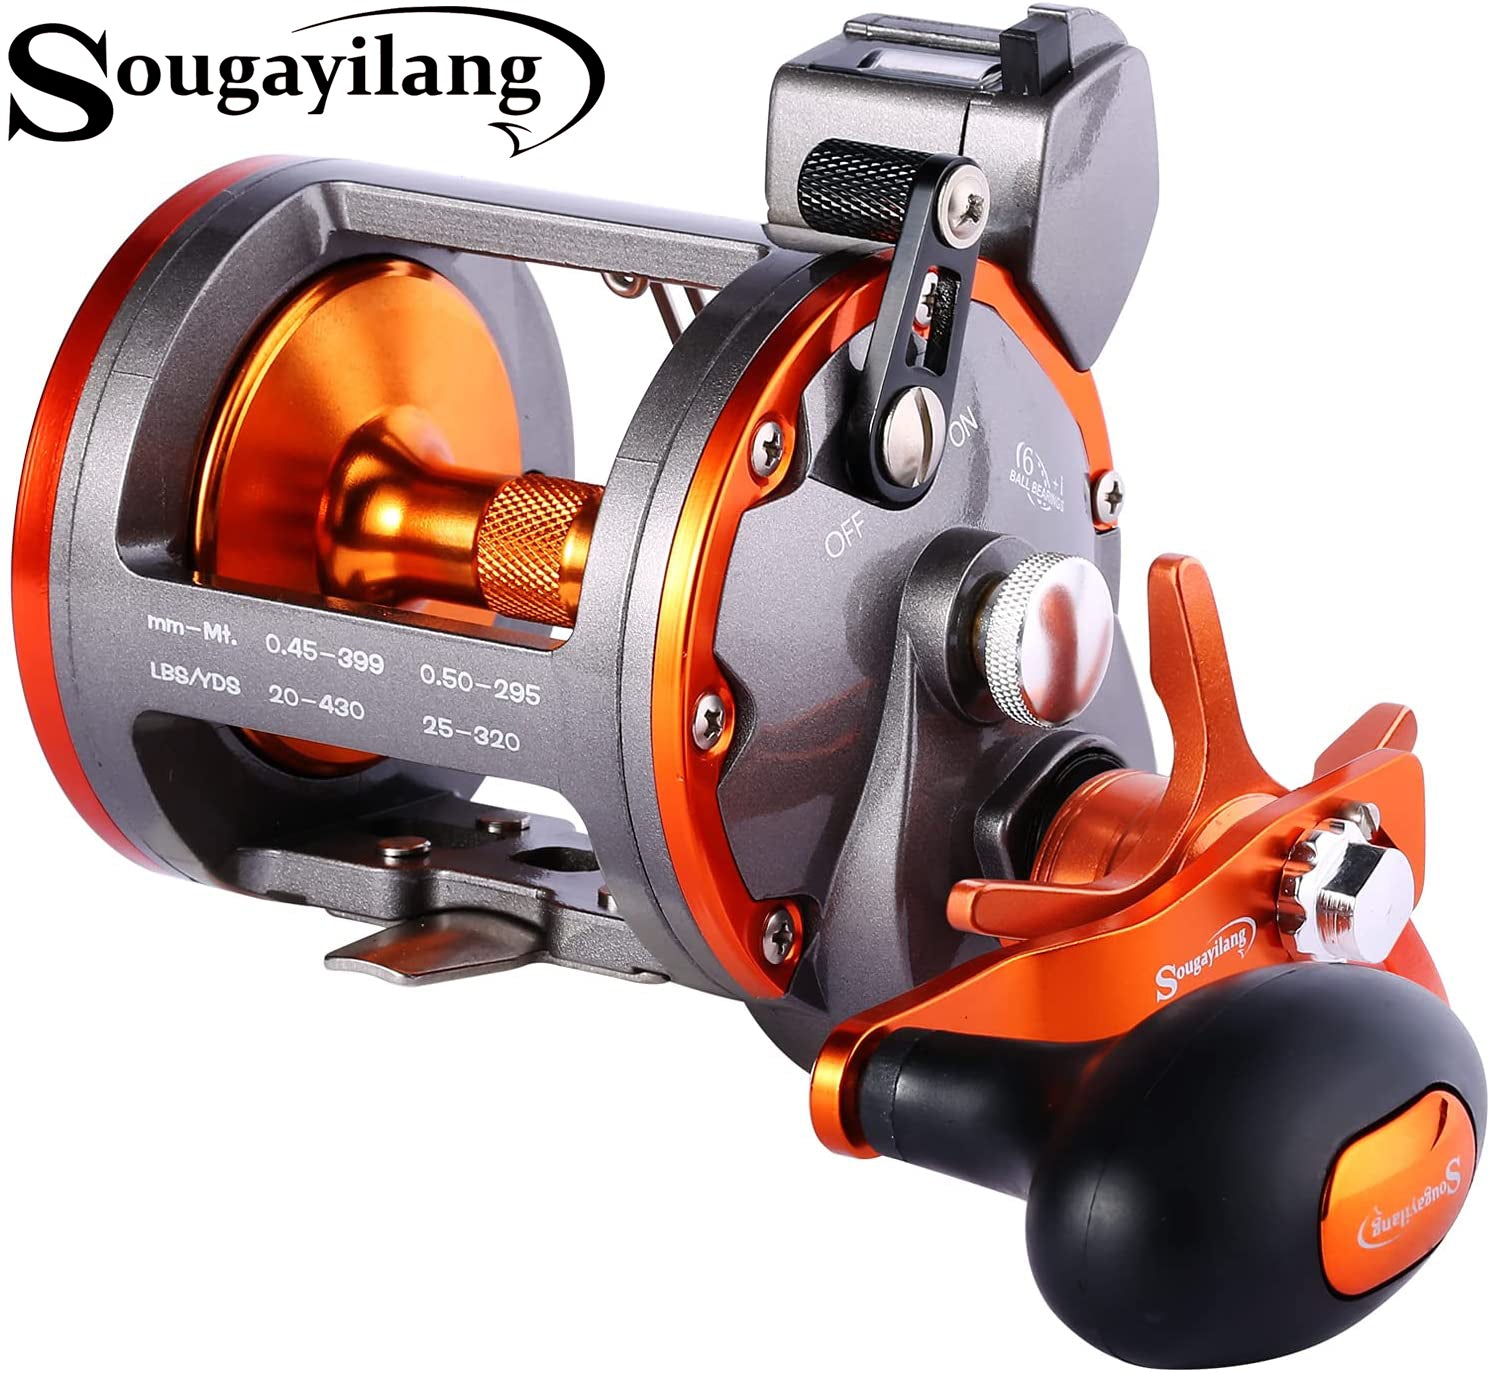 Sougayilang Trolling Fishing Reel Line Counter Graphite Body Carbon Disc Drag, Size: Left Handed